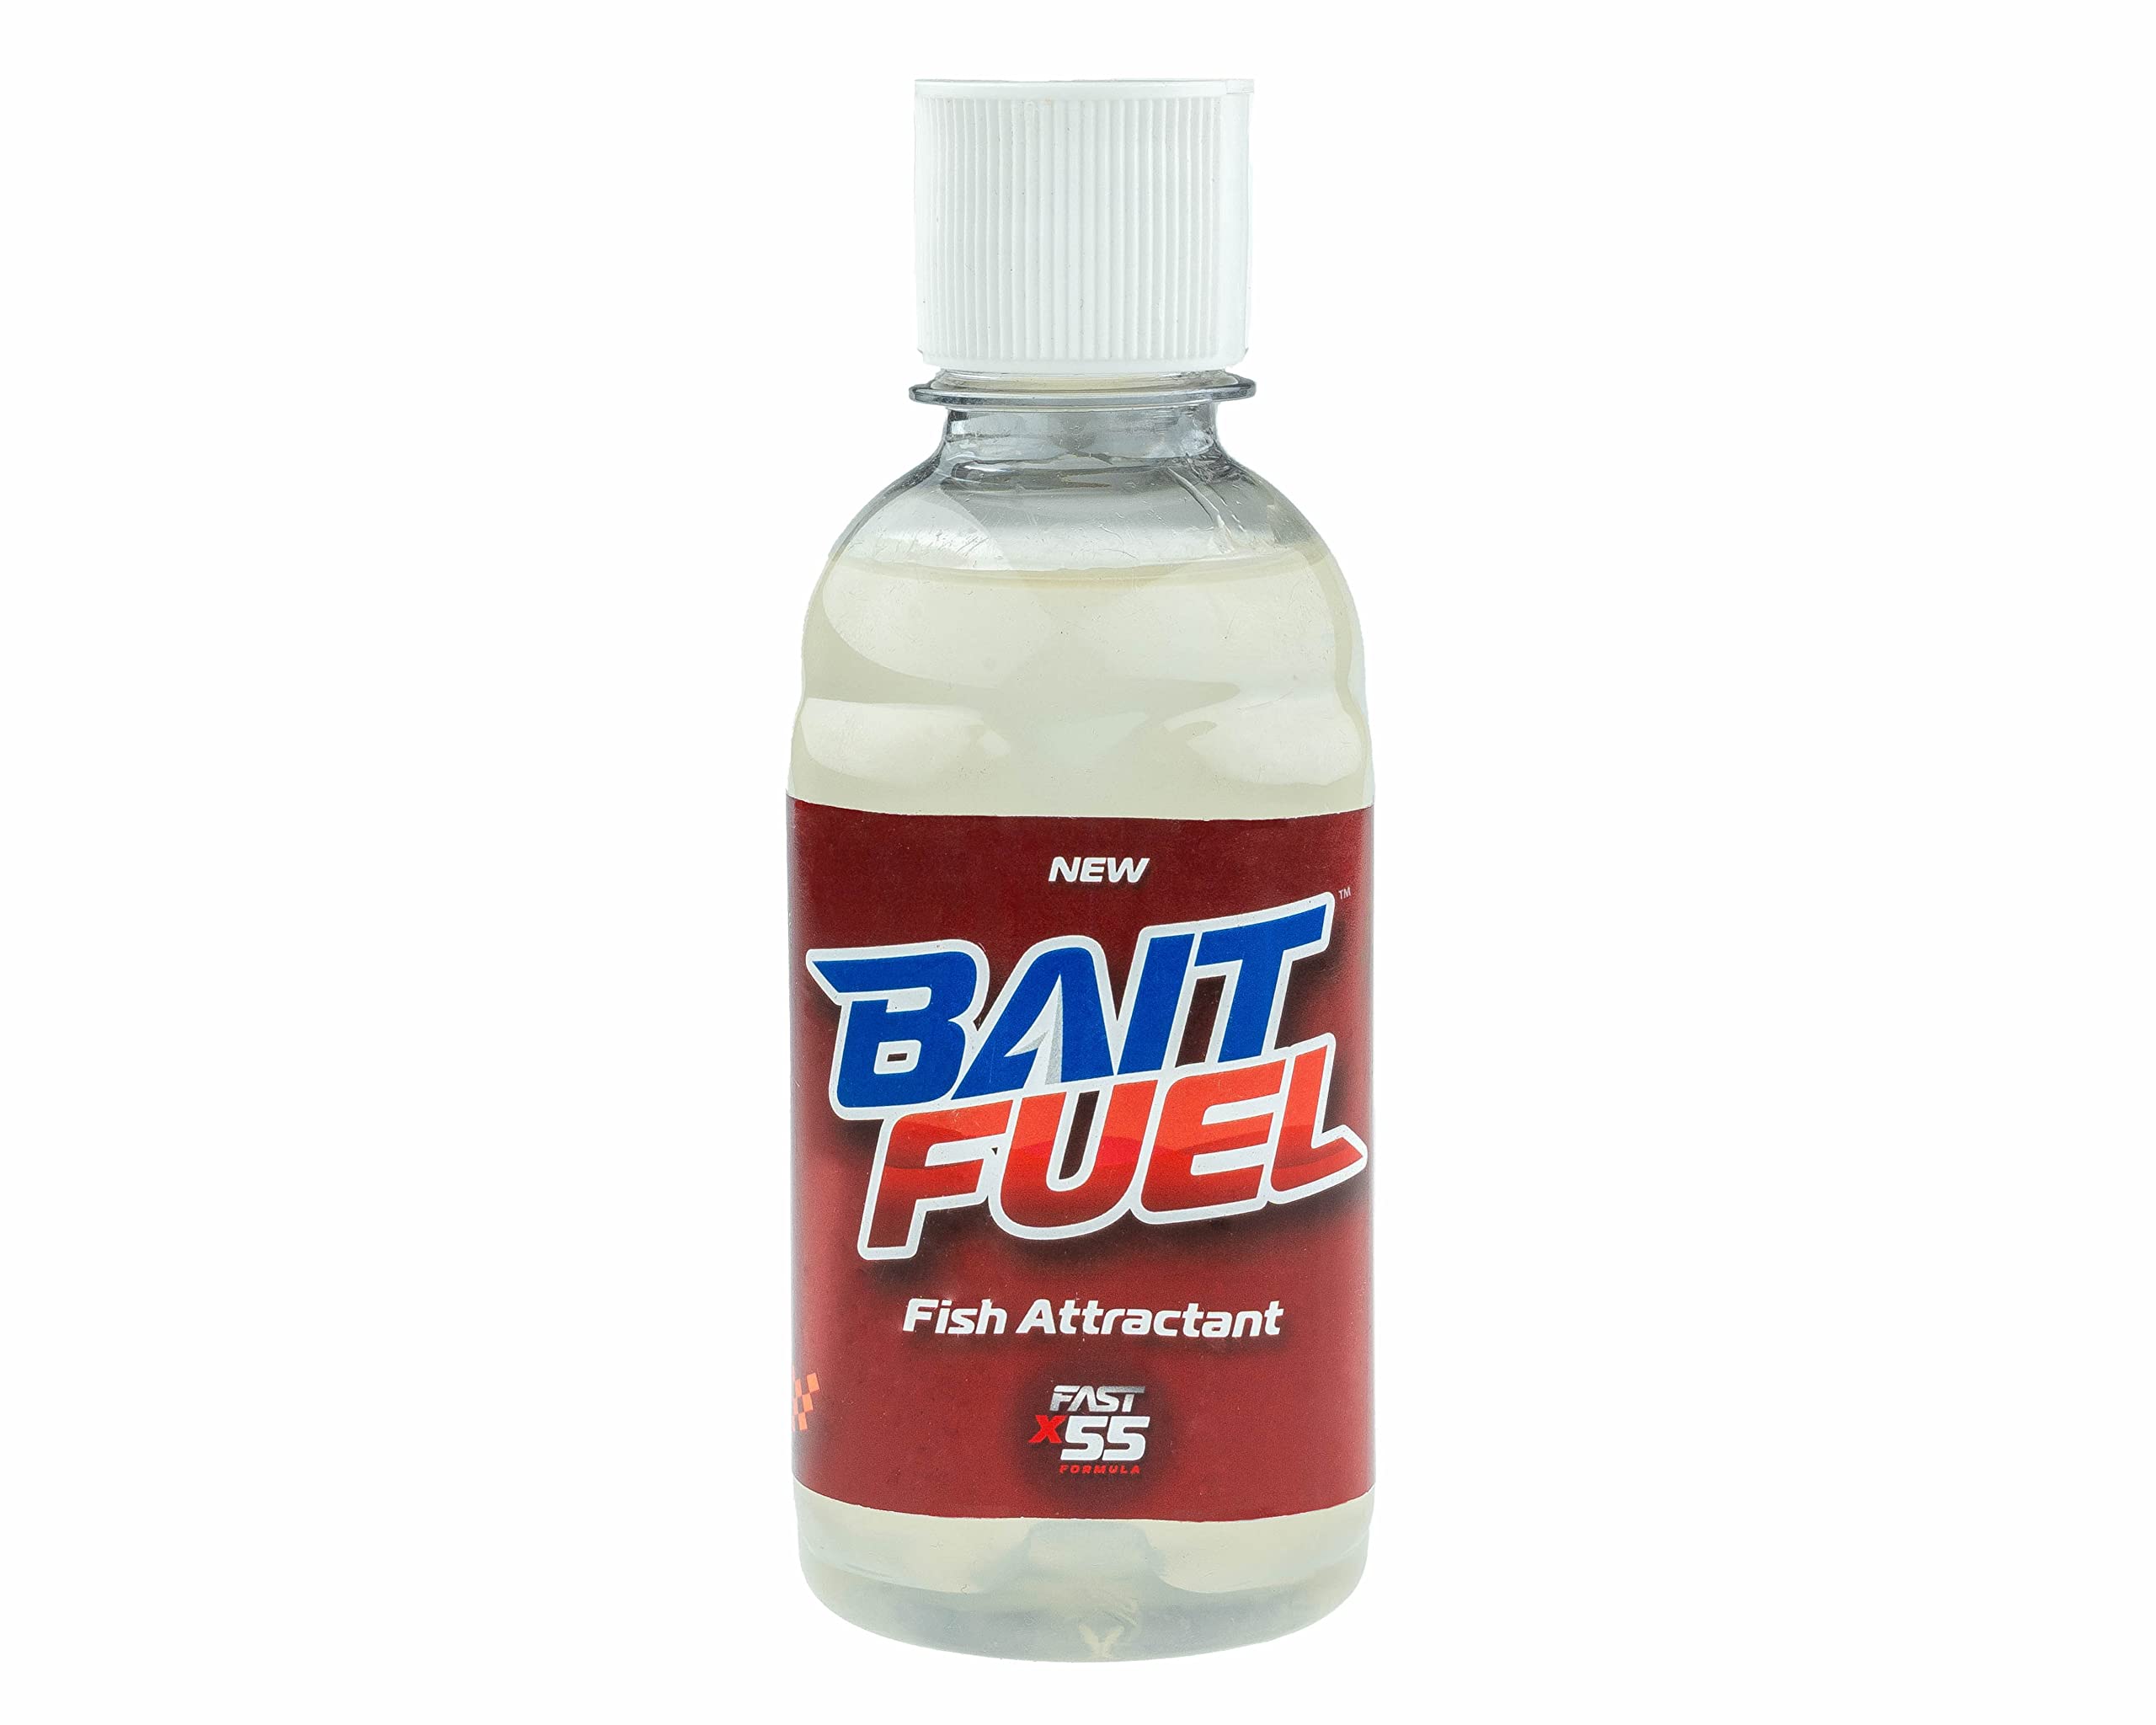 BAITFUEL X55 Formula Gel for Fishing: The Supercharged Fish Scent  Technology with Powerful Attractants and Taste